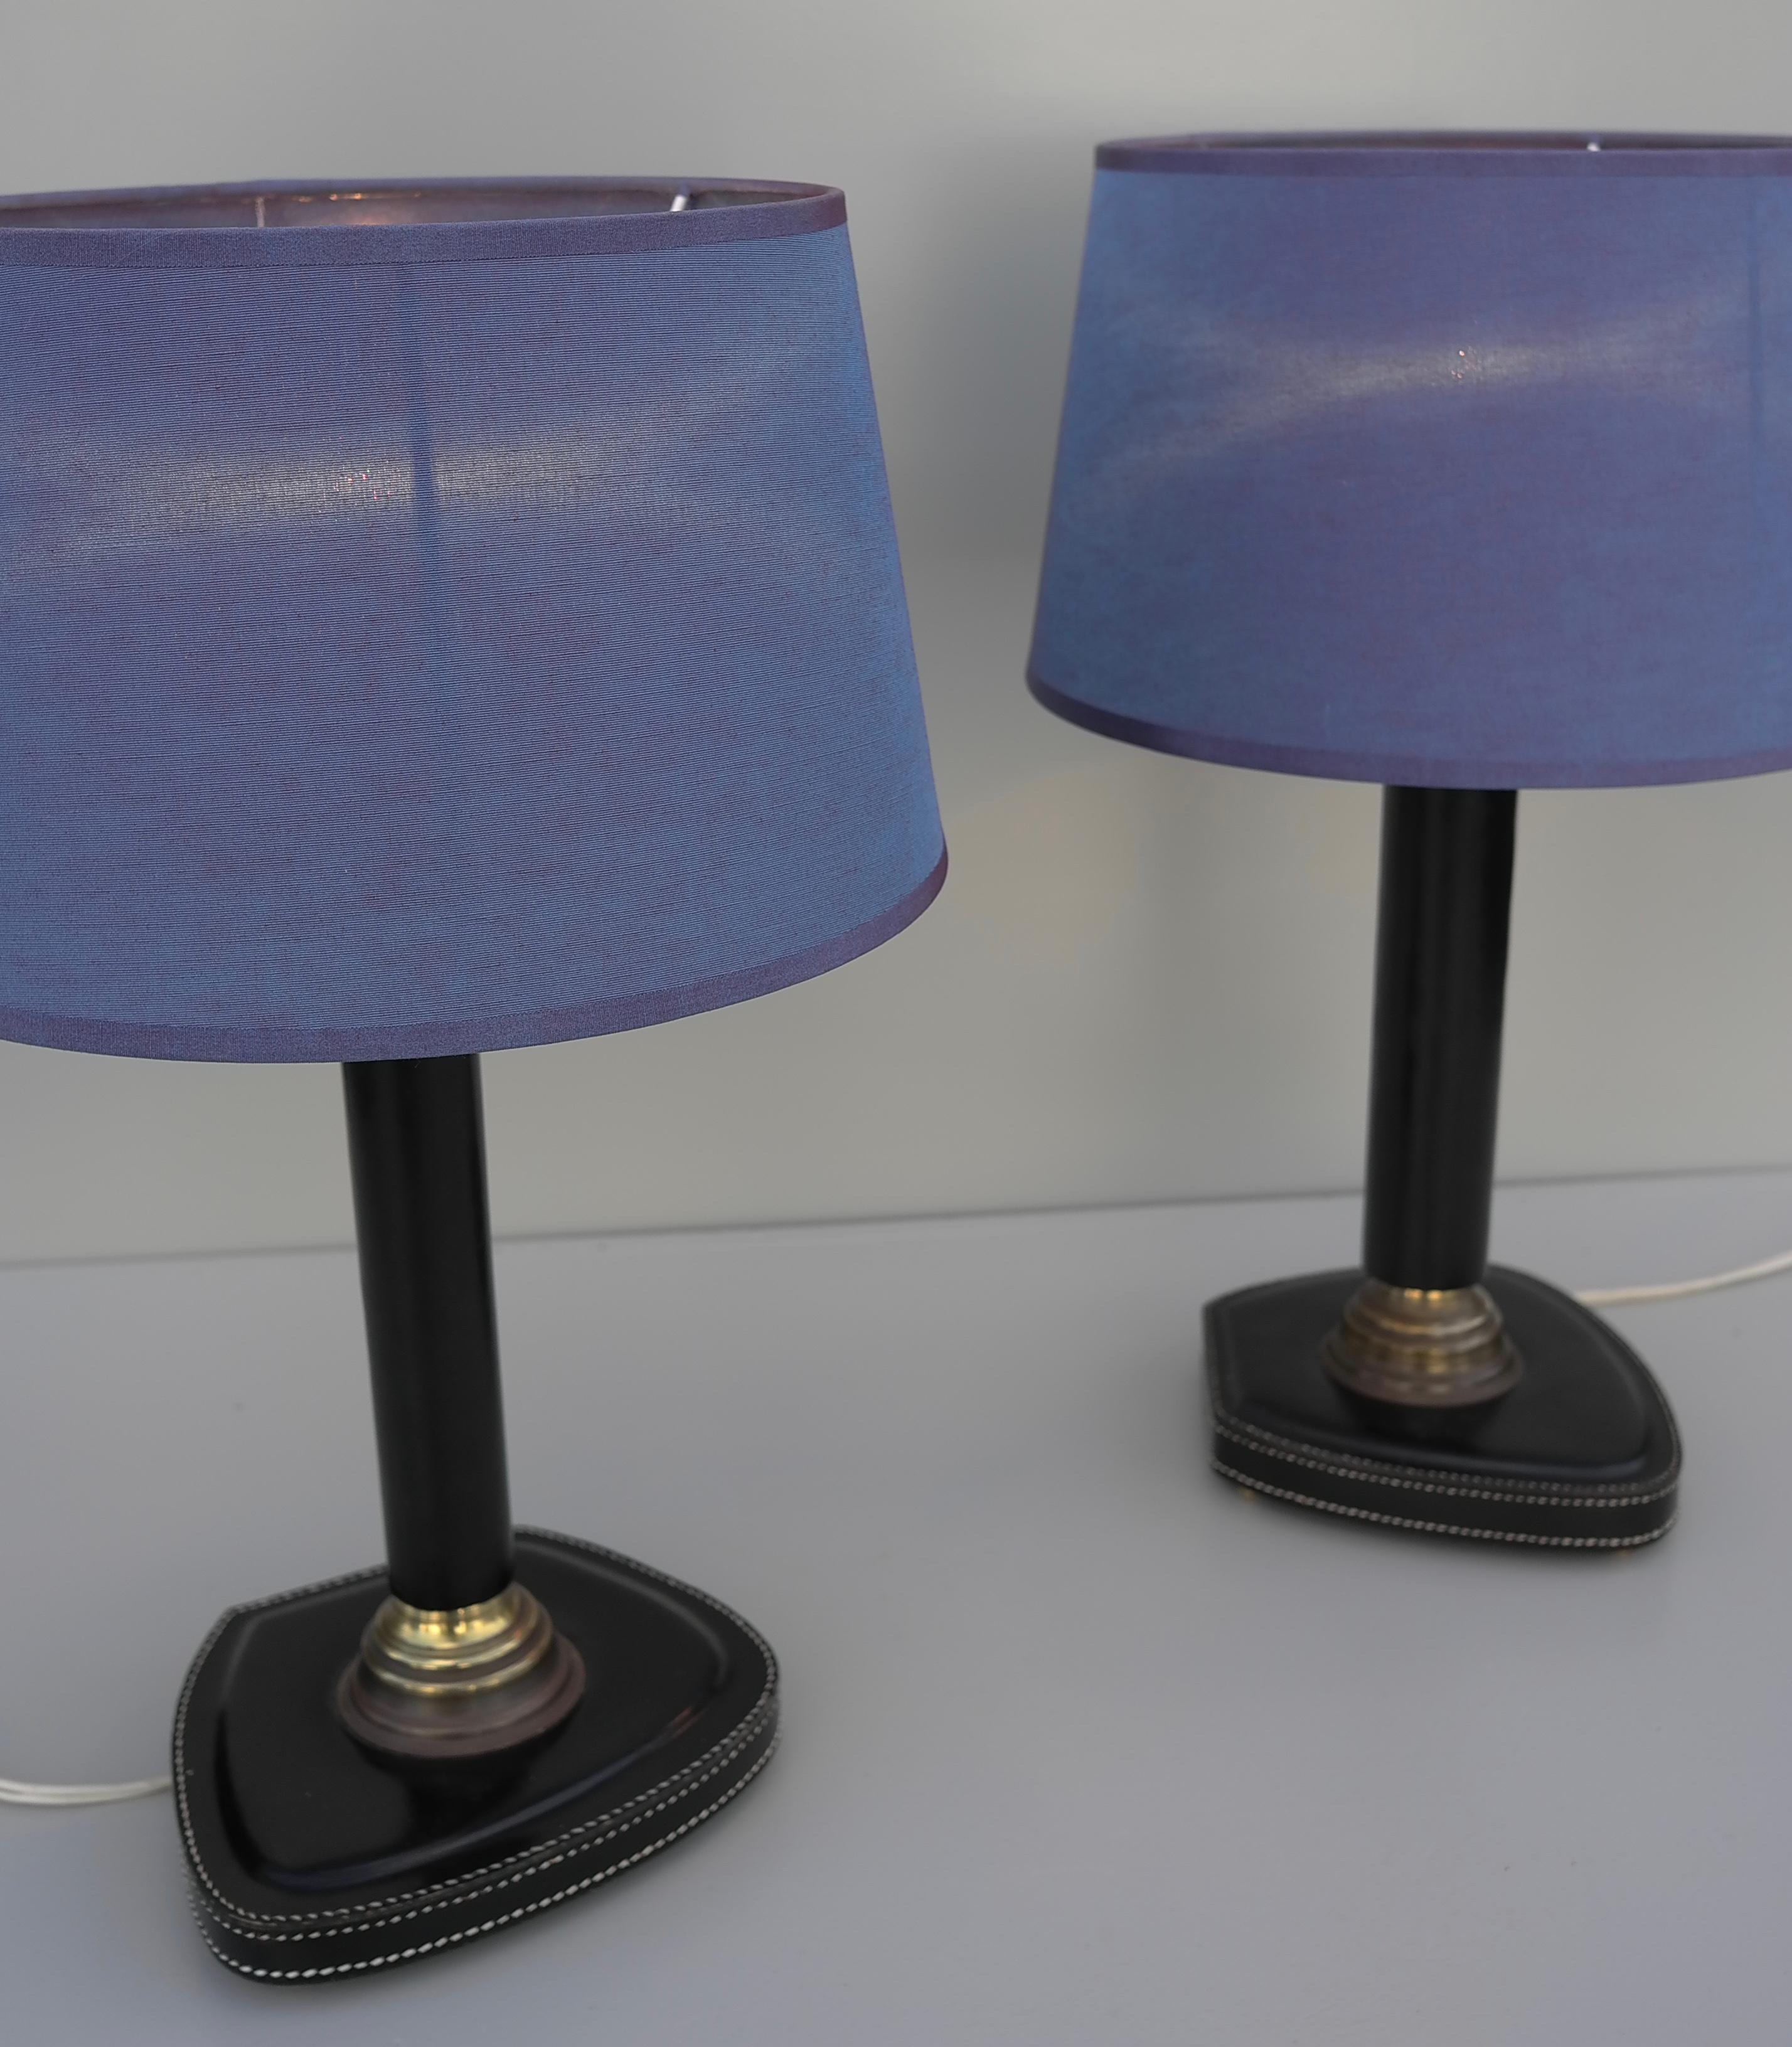 French Pair of Hand-Stitched Black Leather Table Lamps, France, 1960s For Sale